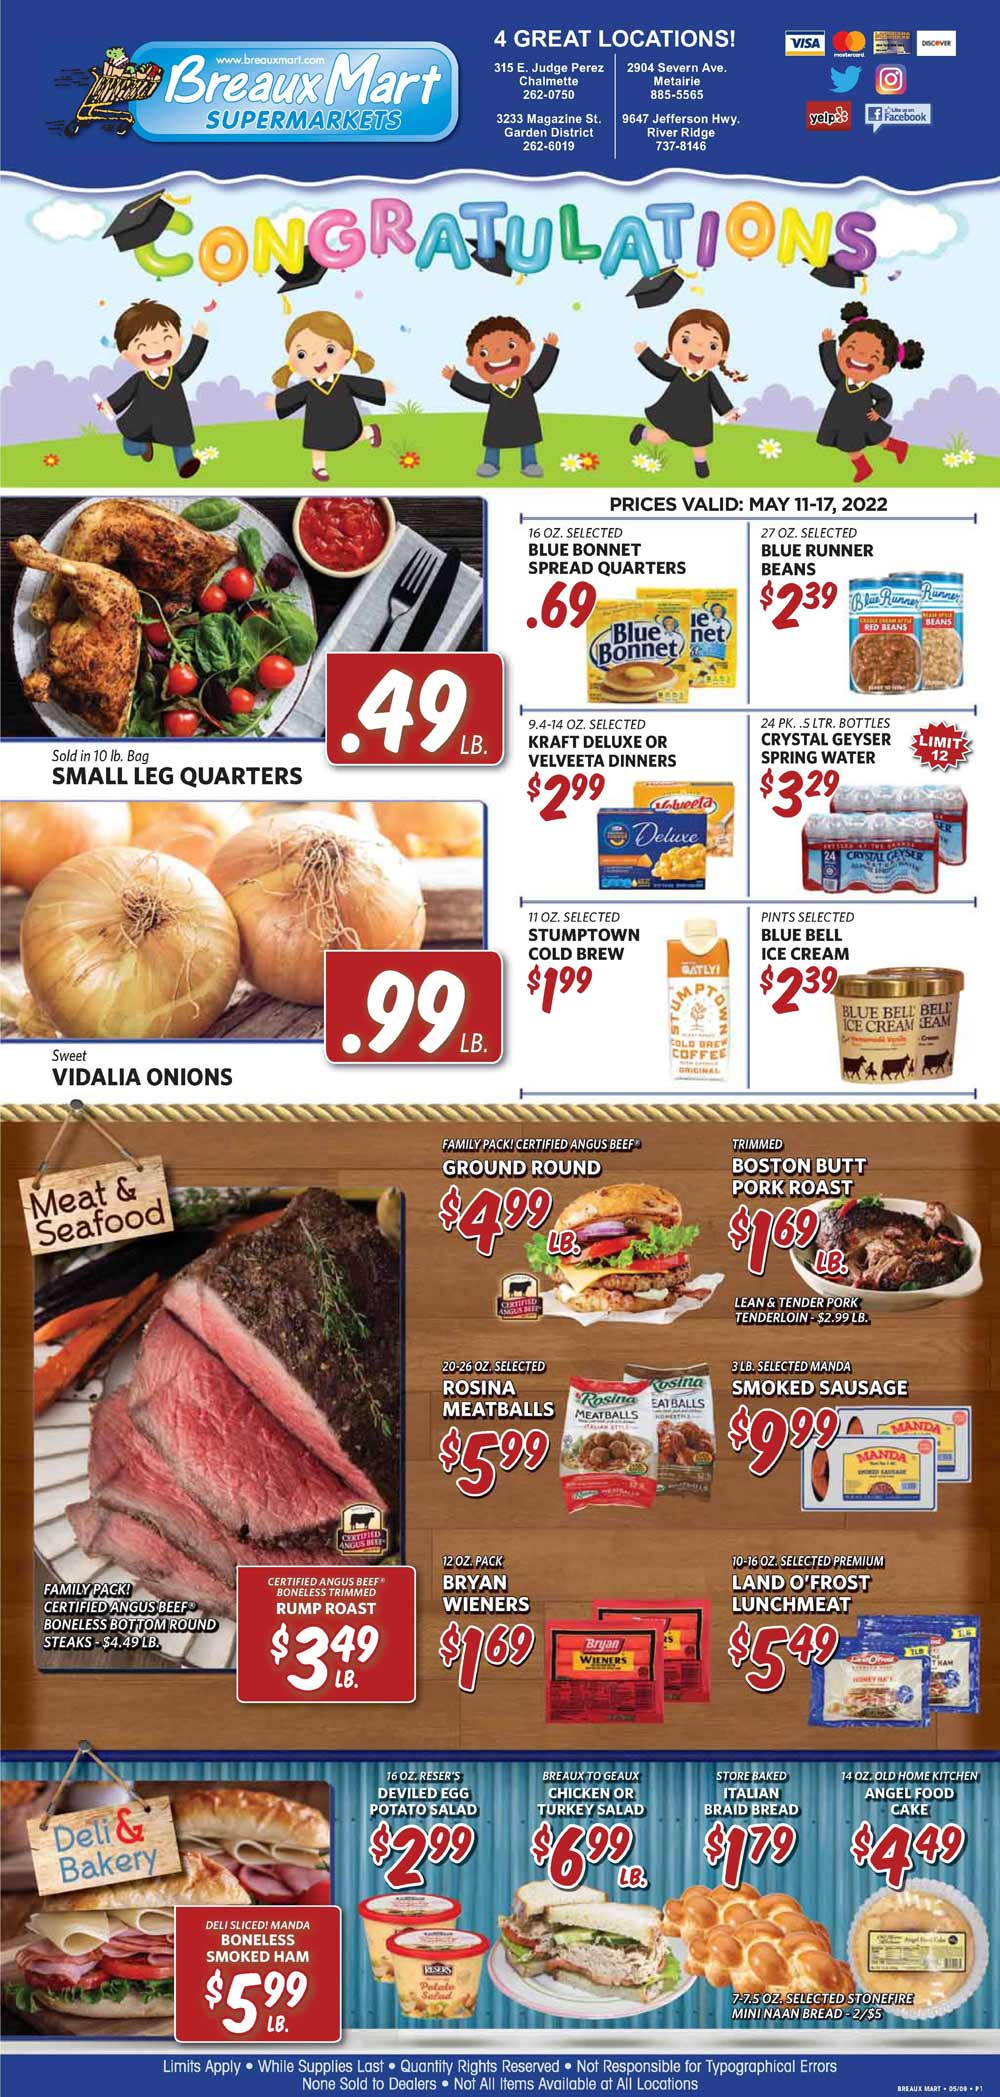 Breaux Mart Weekly Ad (5/11/22 - 5/17/22)